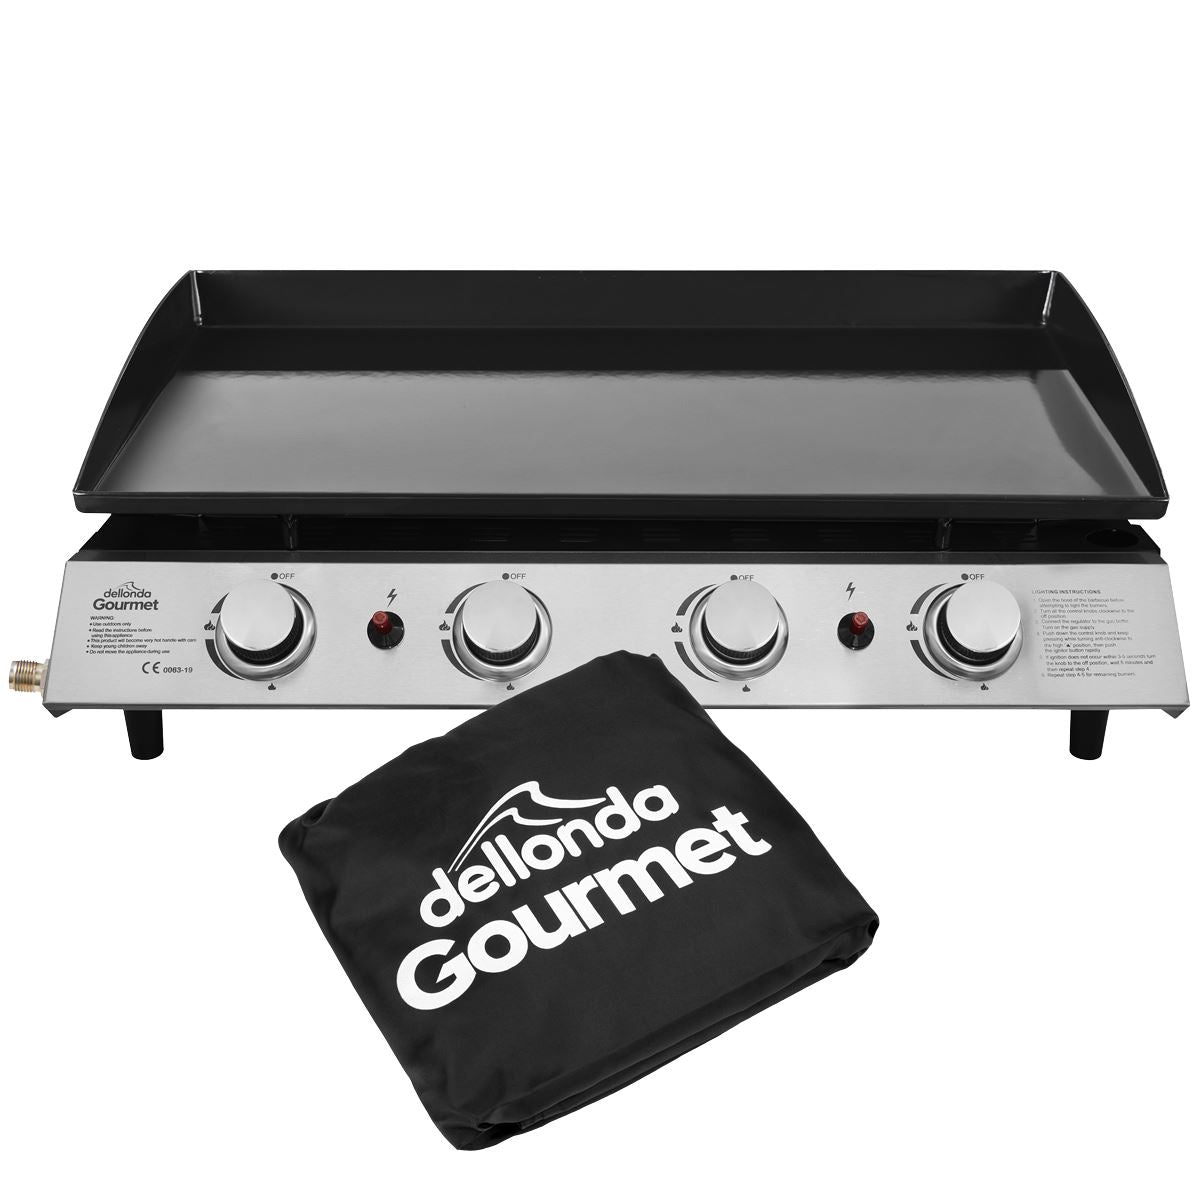 Dellonda 4 Burner Portable Gas Plancha 10kW BBQ Griddle, Supplied with Water Resistant PVC Cover, Stainless Steel